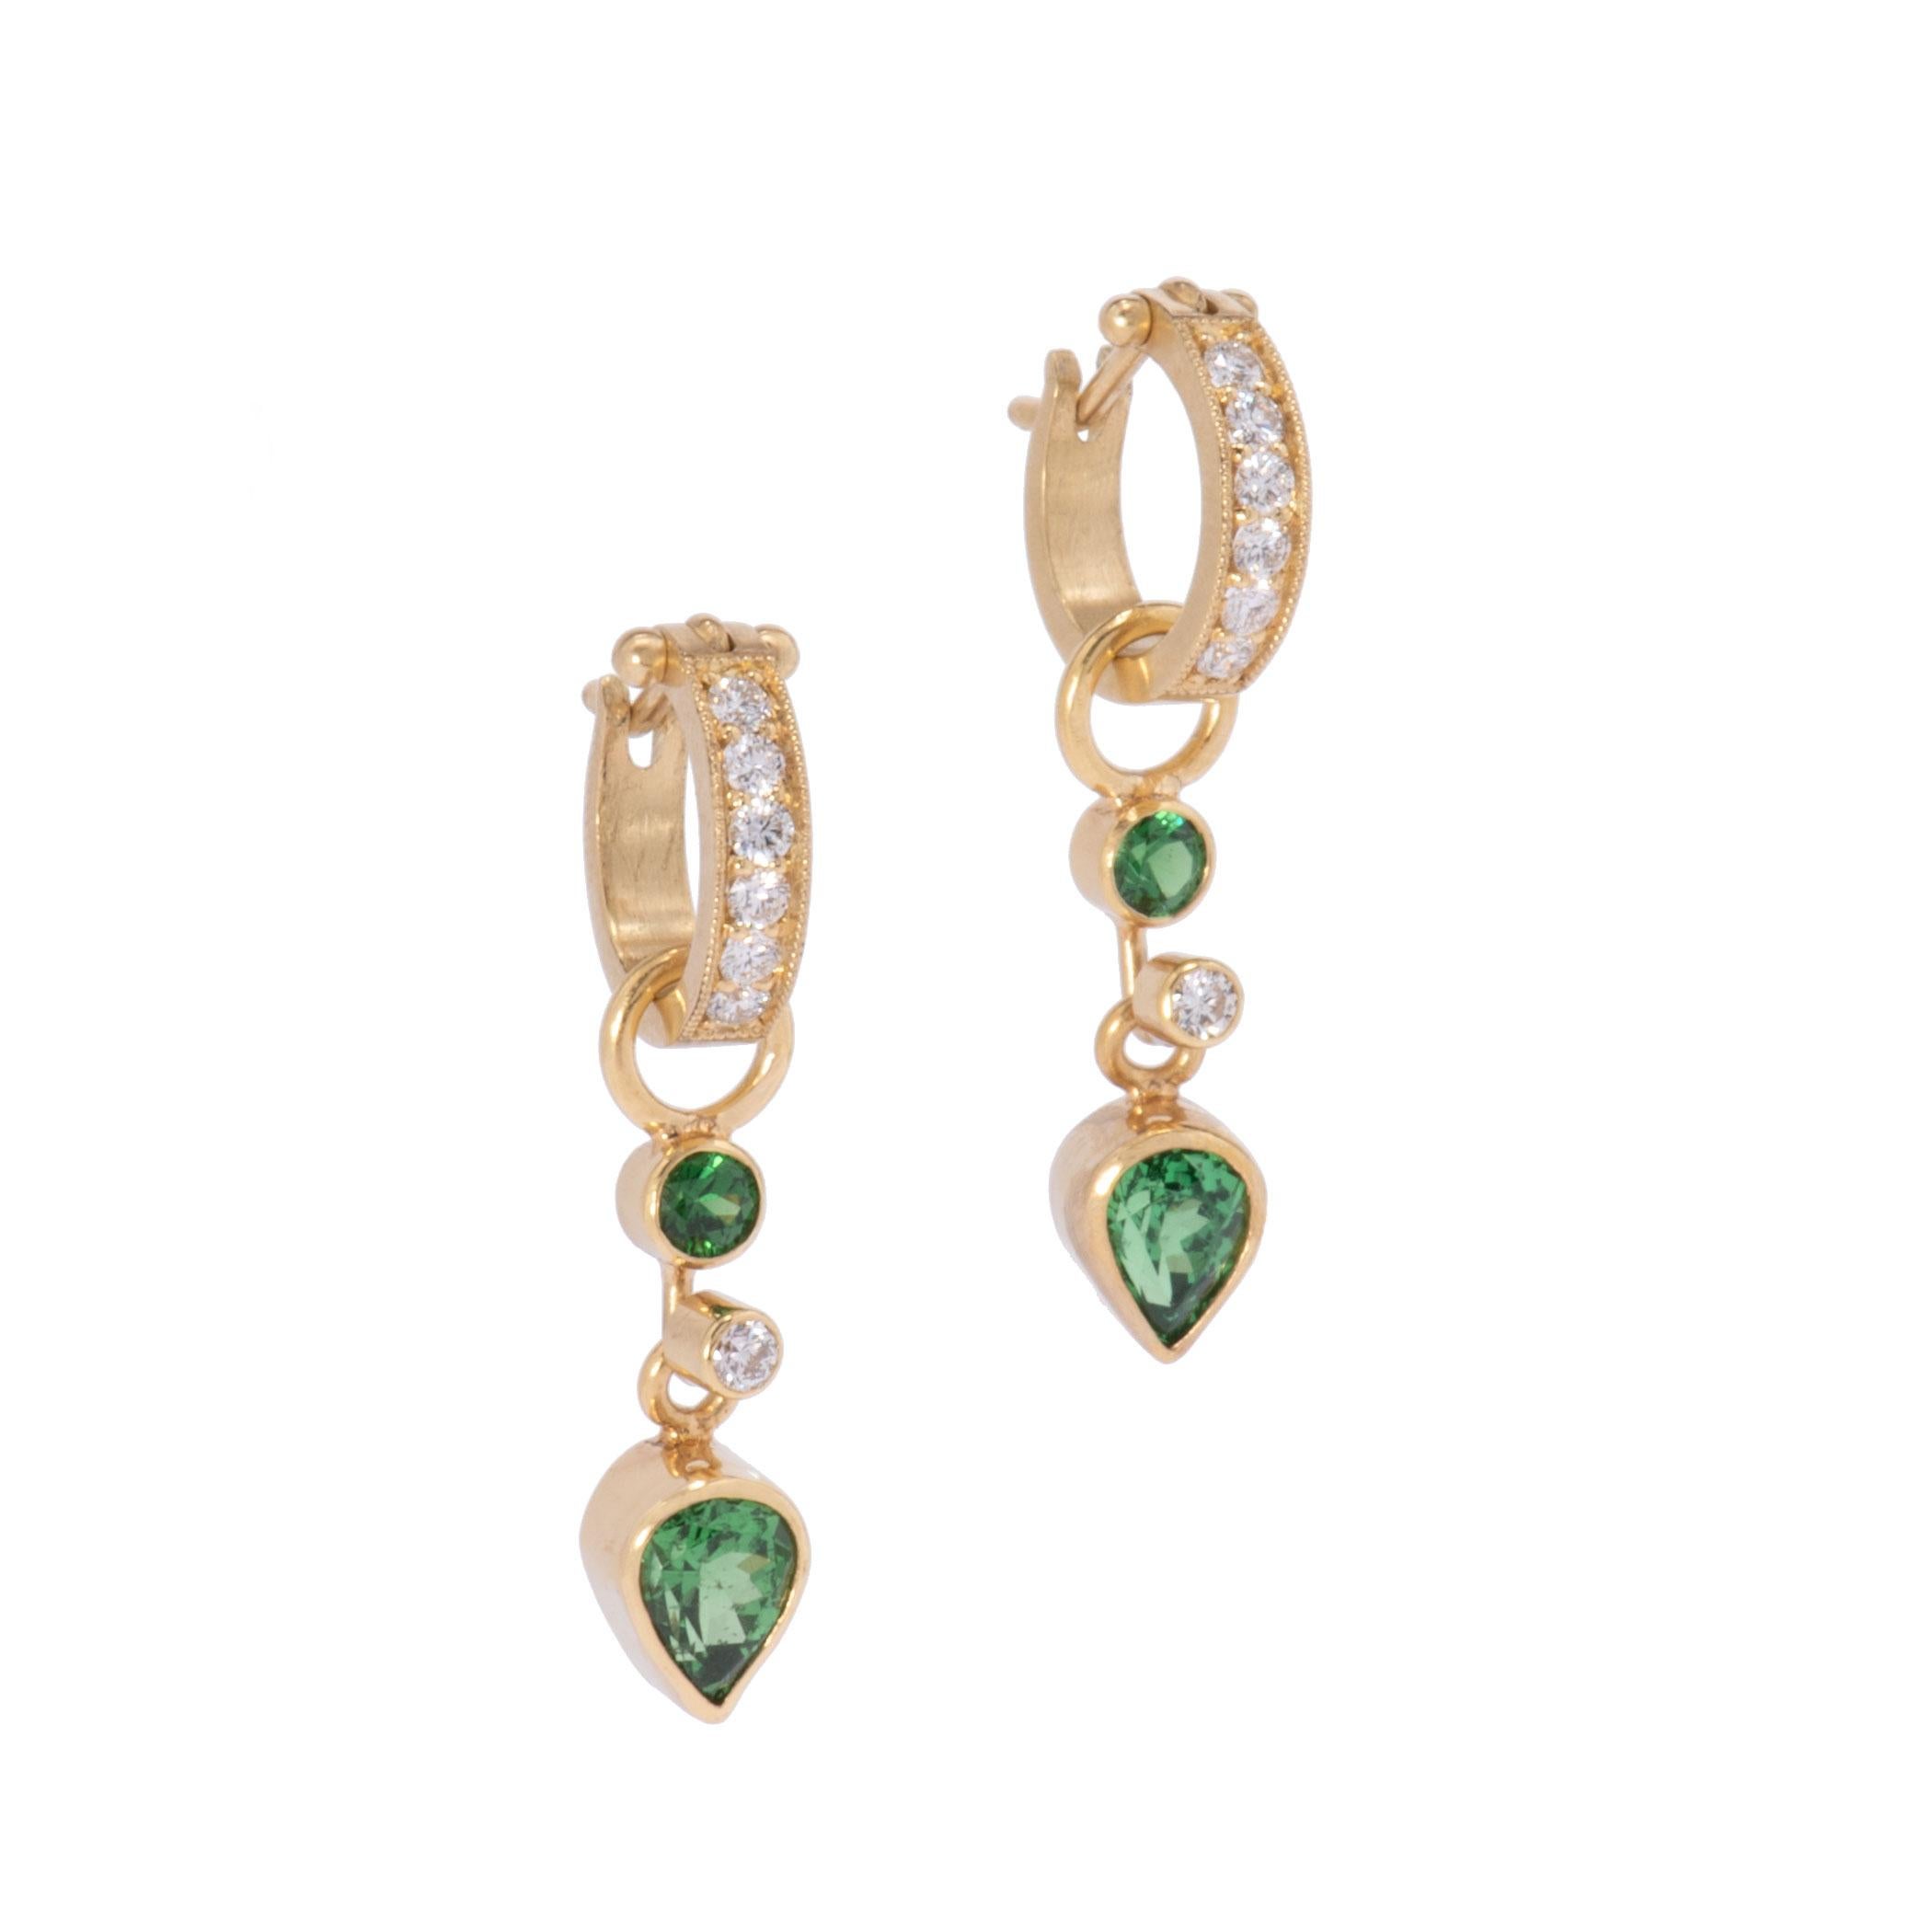 Deep pine green tsavorite garnets 2.29ctw, one round and one swinging teardrop sparkle with intensity above and below round white diamonds .10ctw and are hung on pave diamond hoops .36ctw. Both drops and hoops are hand crafted in our studio of 18k